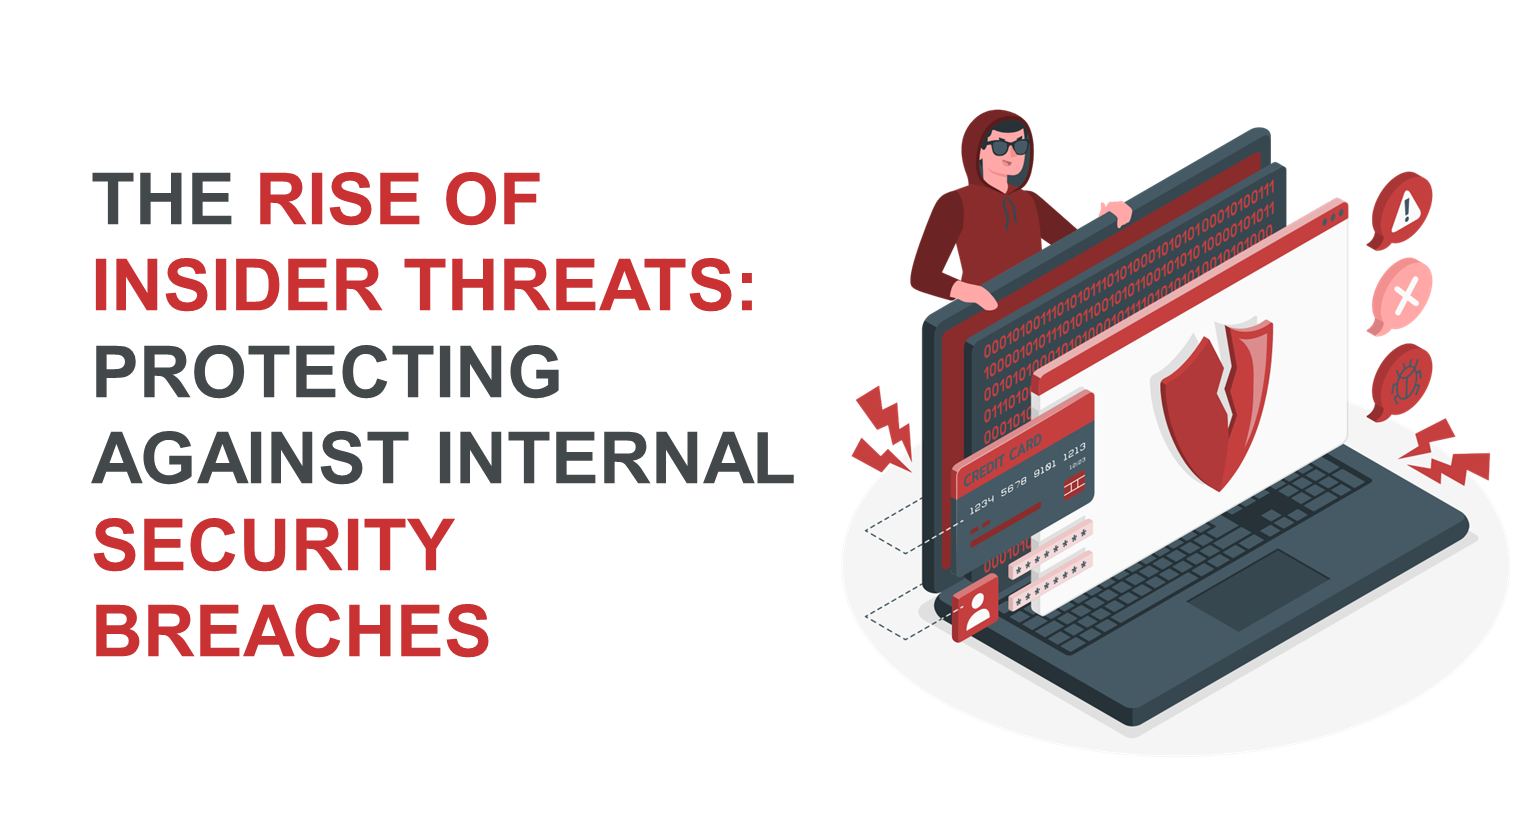 The Rise of Insider Threats: Protecting Against Internal Security Breaches